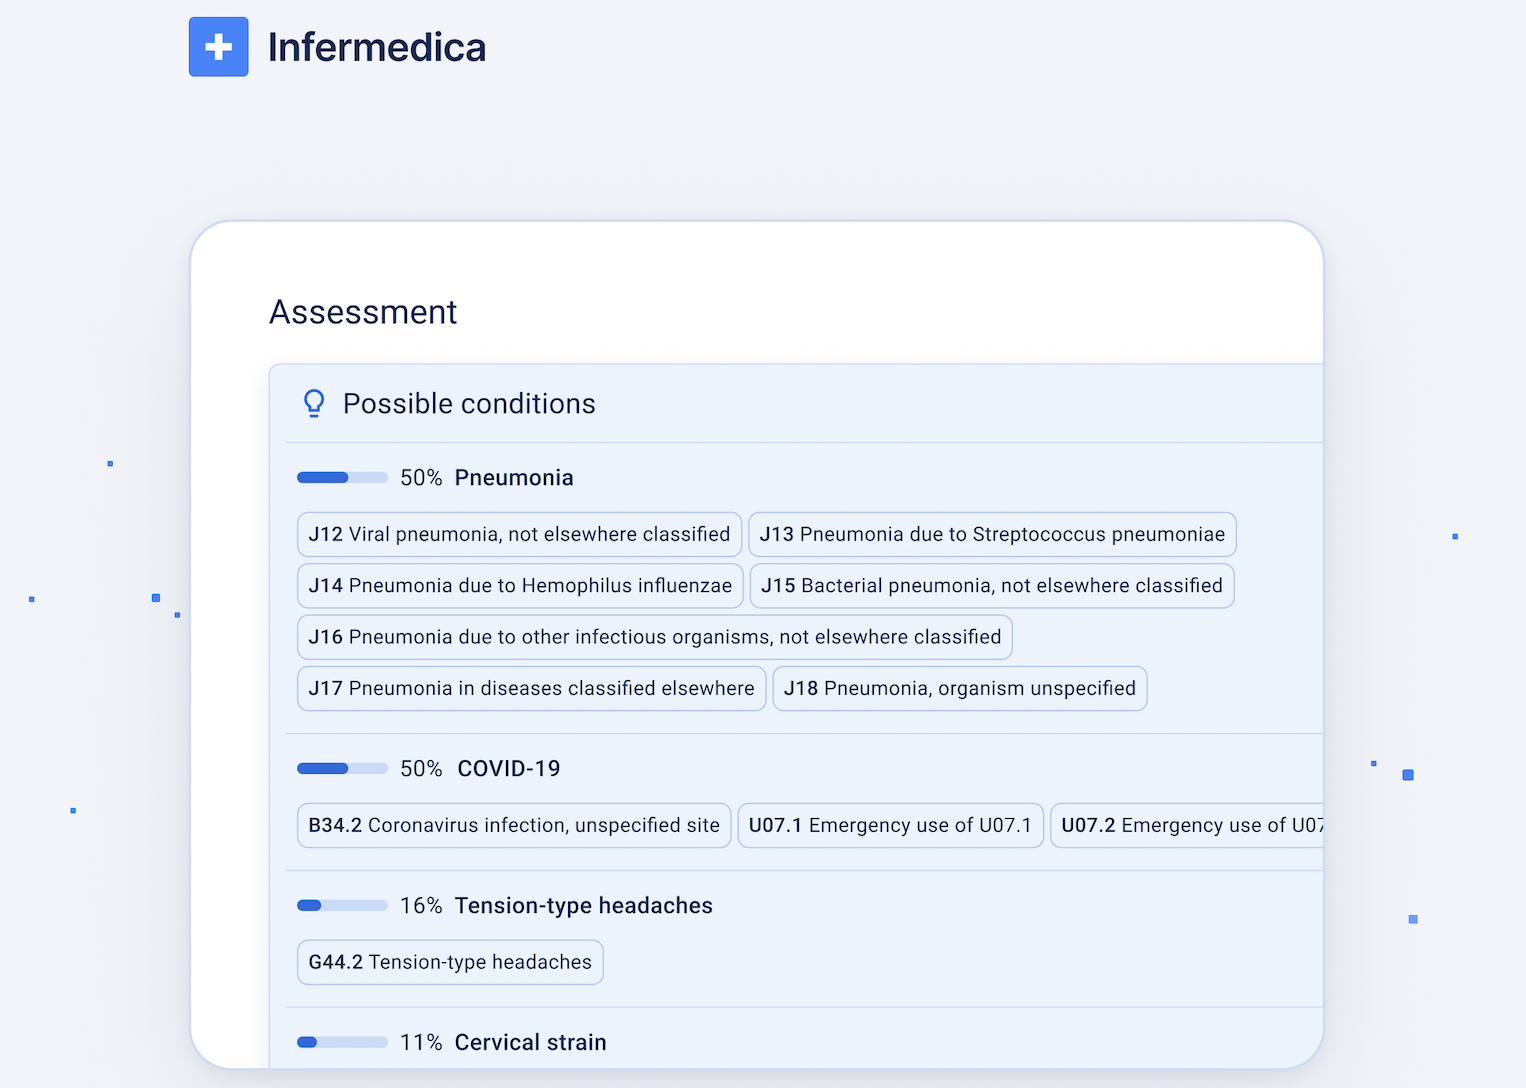 Infermedica raises $30M to expand its AI-based medical guidance platform